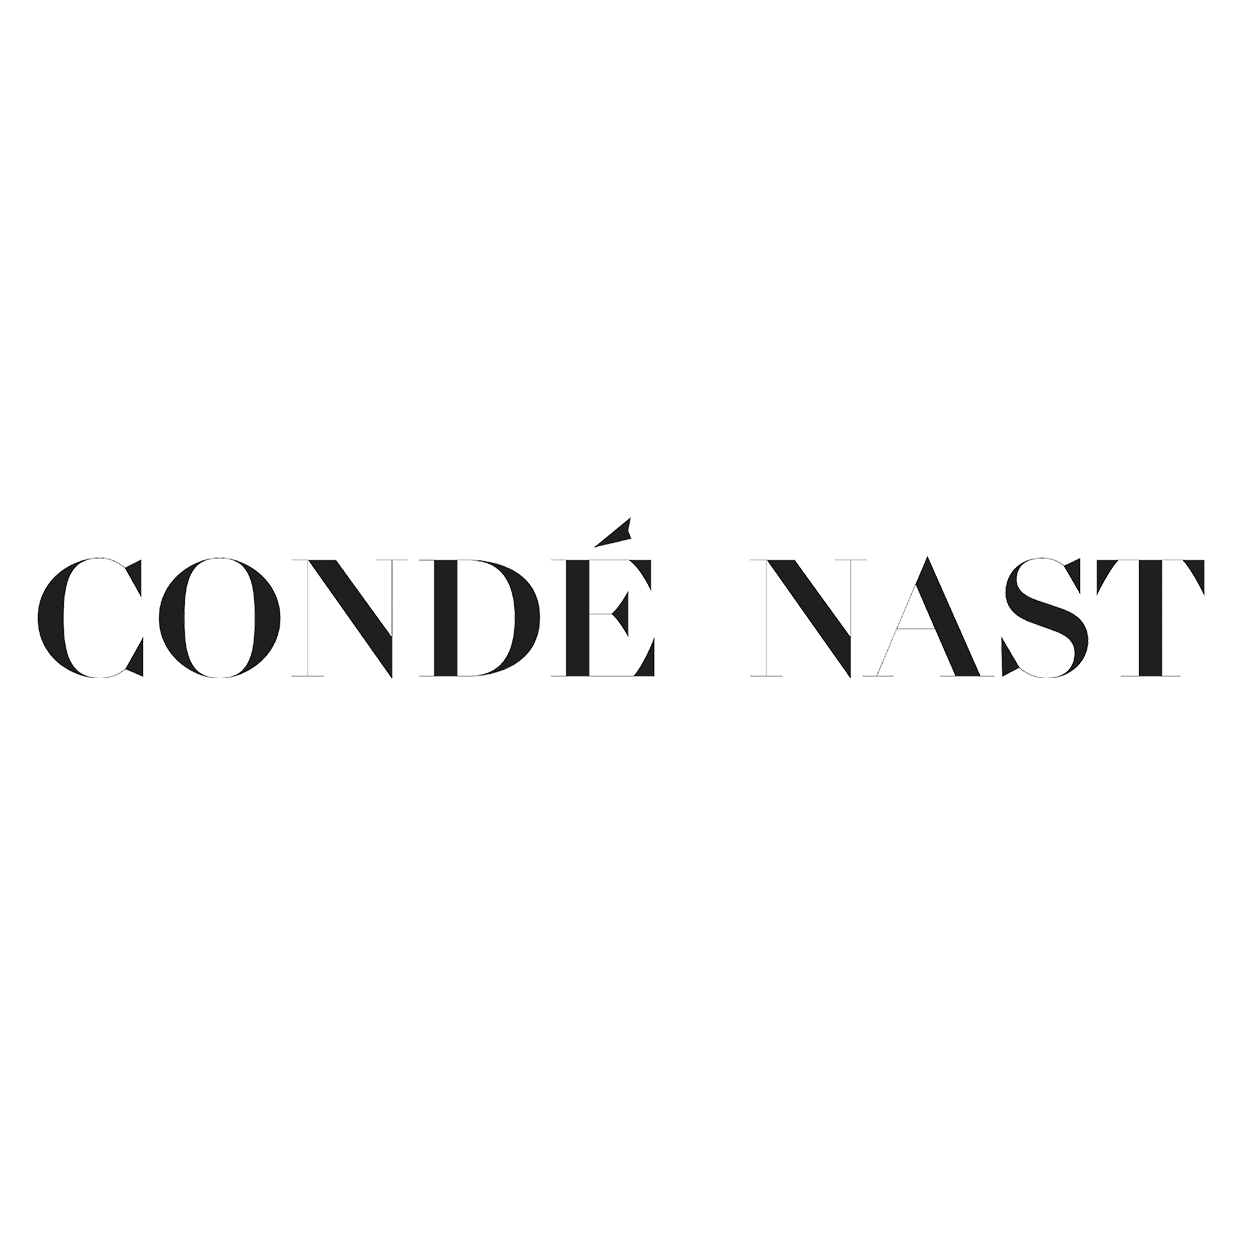 Conde Nast Launches Data Offering; SoftBank Posts Worst Financial